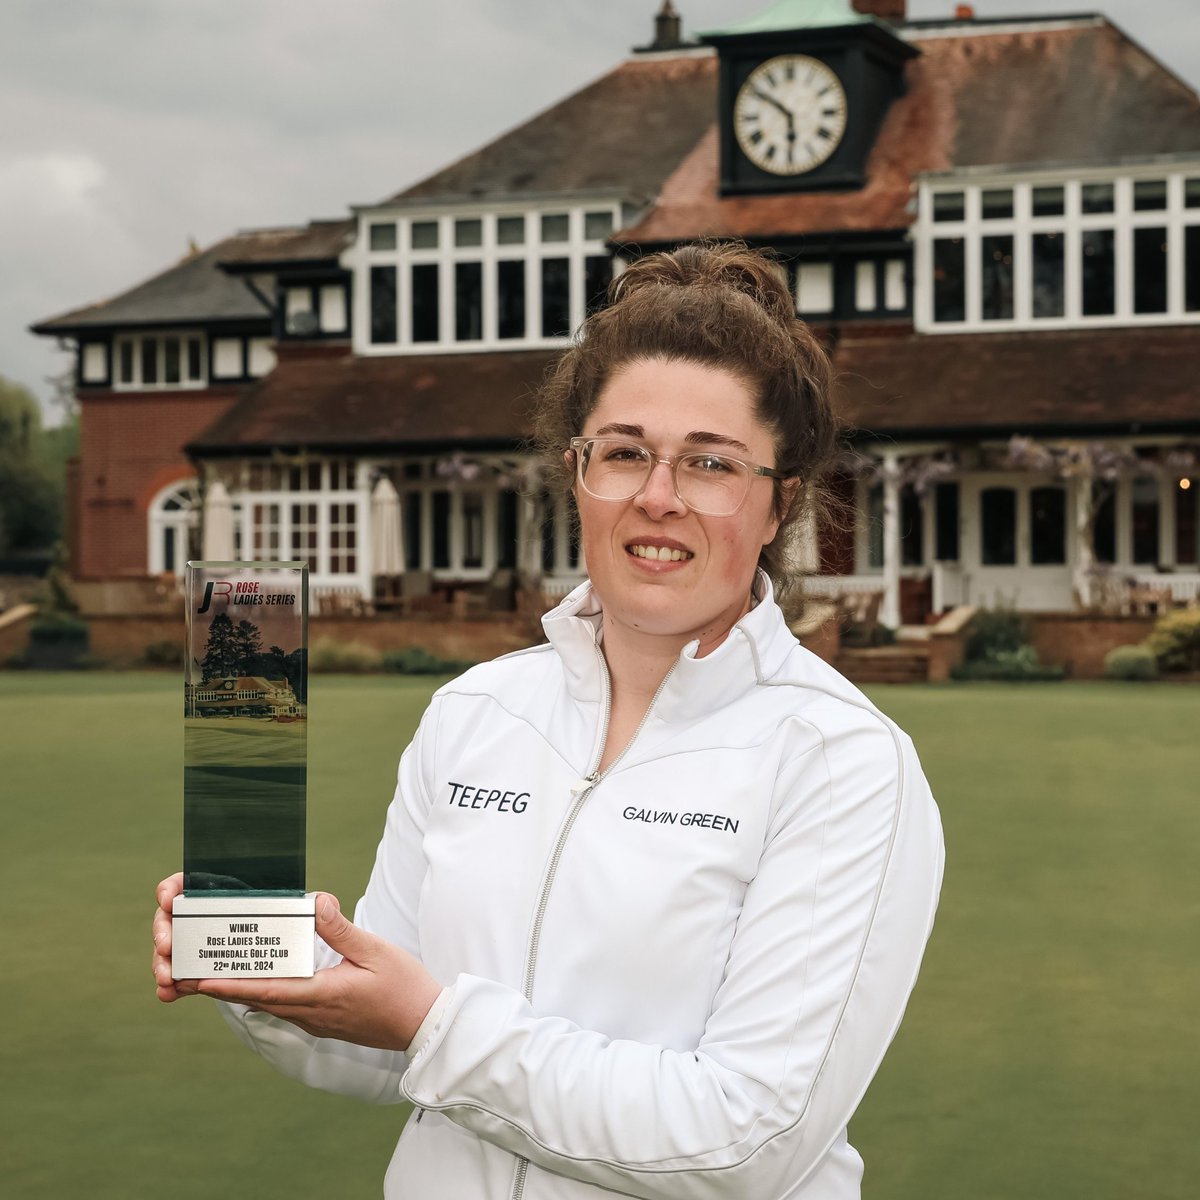 🏴󠁧󠁢󠁳󠁣󠁴󠁿 scores and positions in latest @RoseLadiesGolf event at Sunningdale: +1 Louise Duncan T9 +3 Penny Brown T13 +5 Tara Mactaggart T25 +6 Michele Thomson T31 Won on -3 by England's Emily Toy ⬇️ @ScotsmanSport